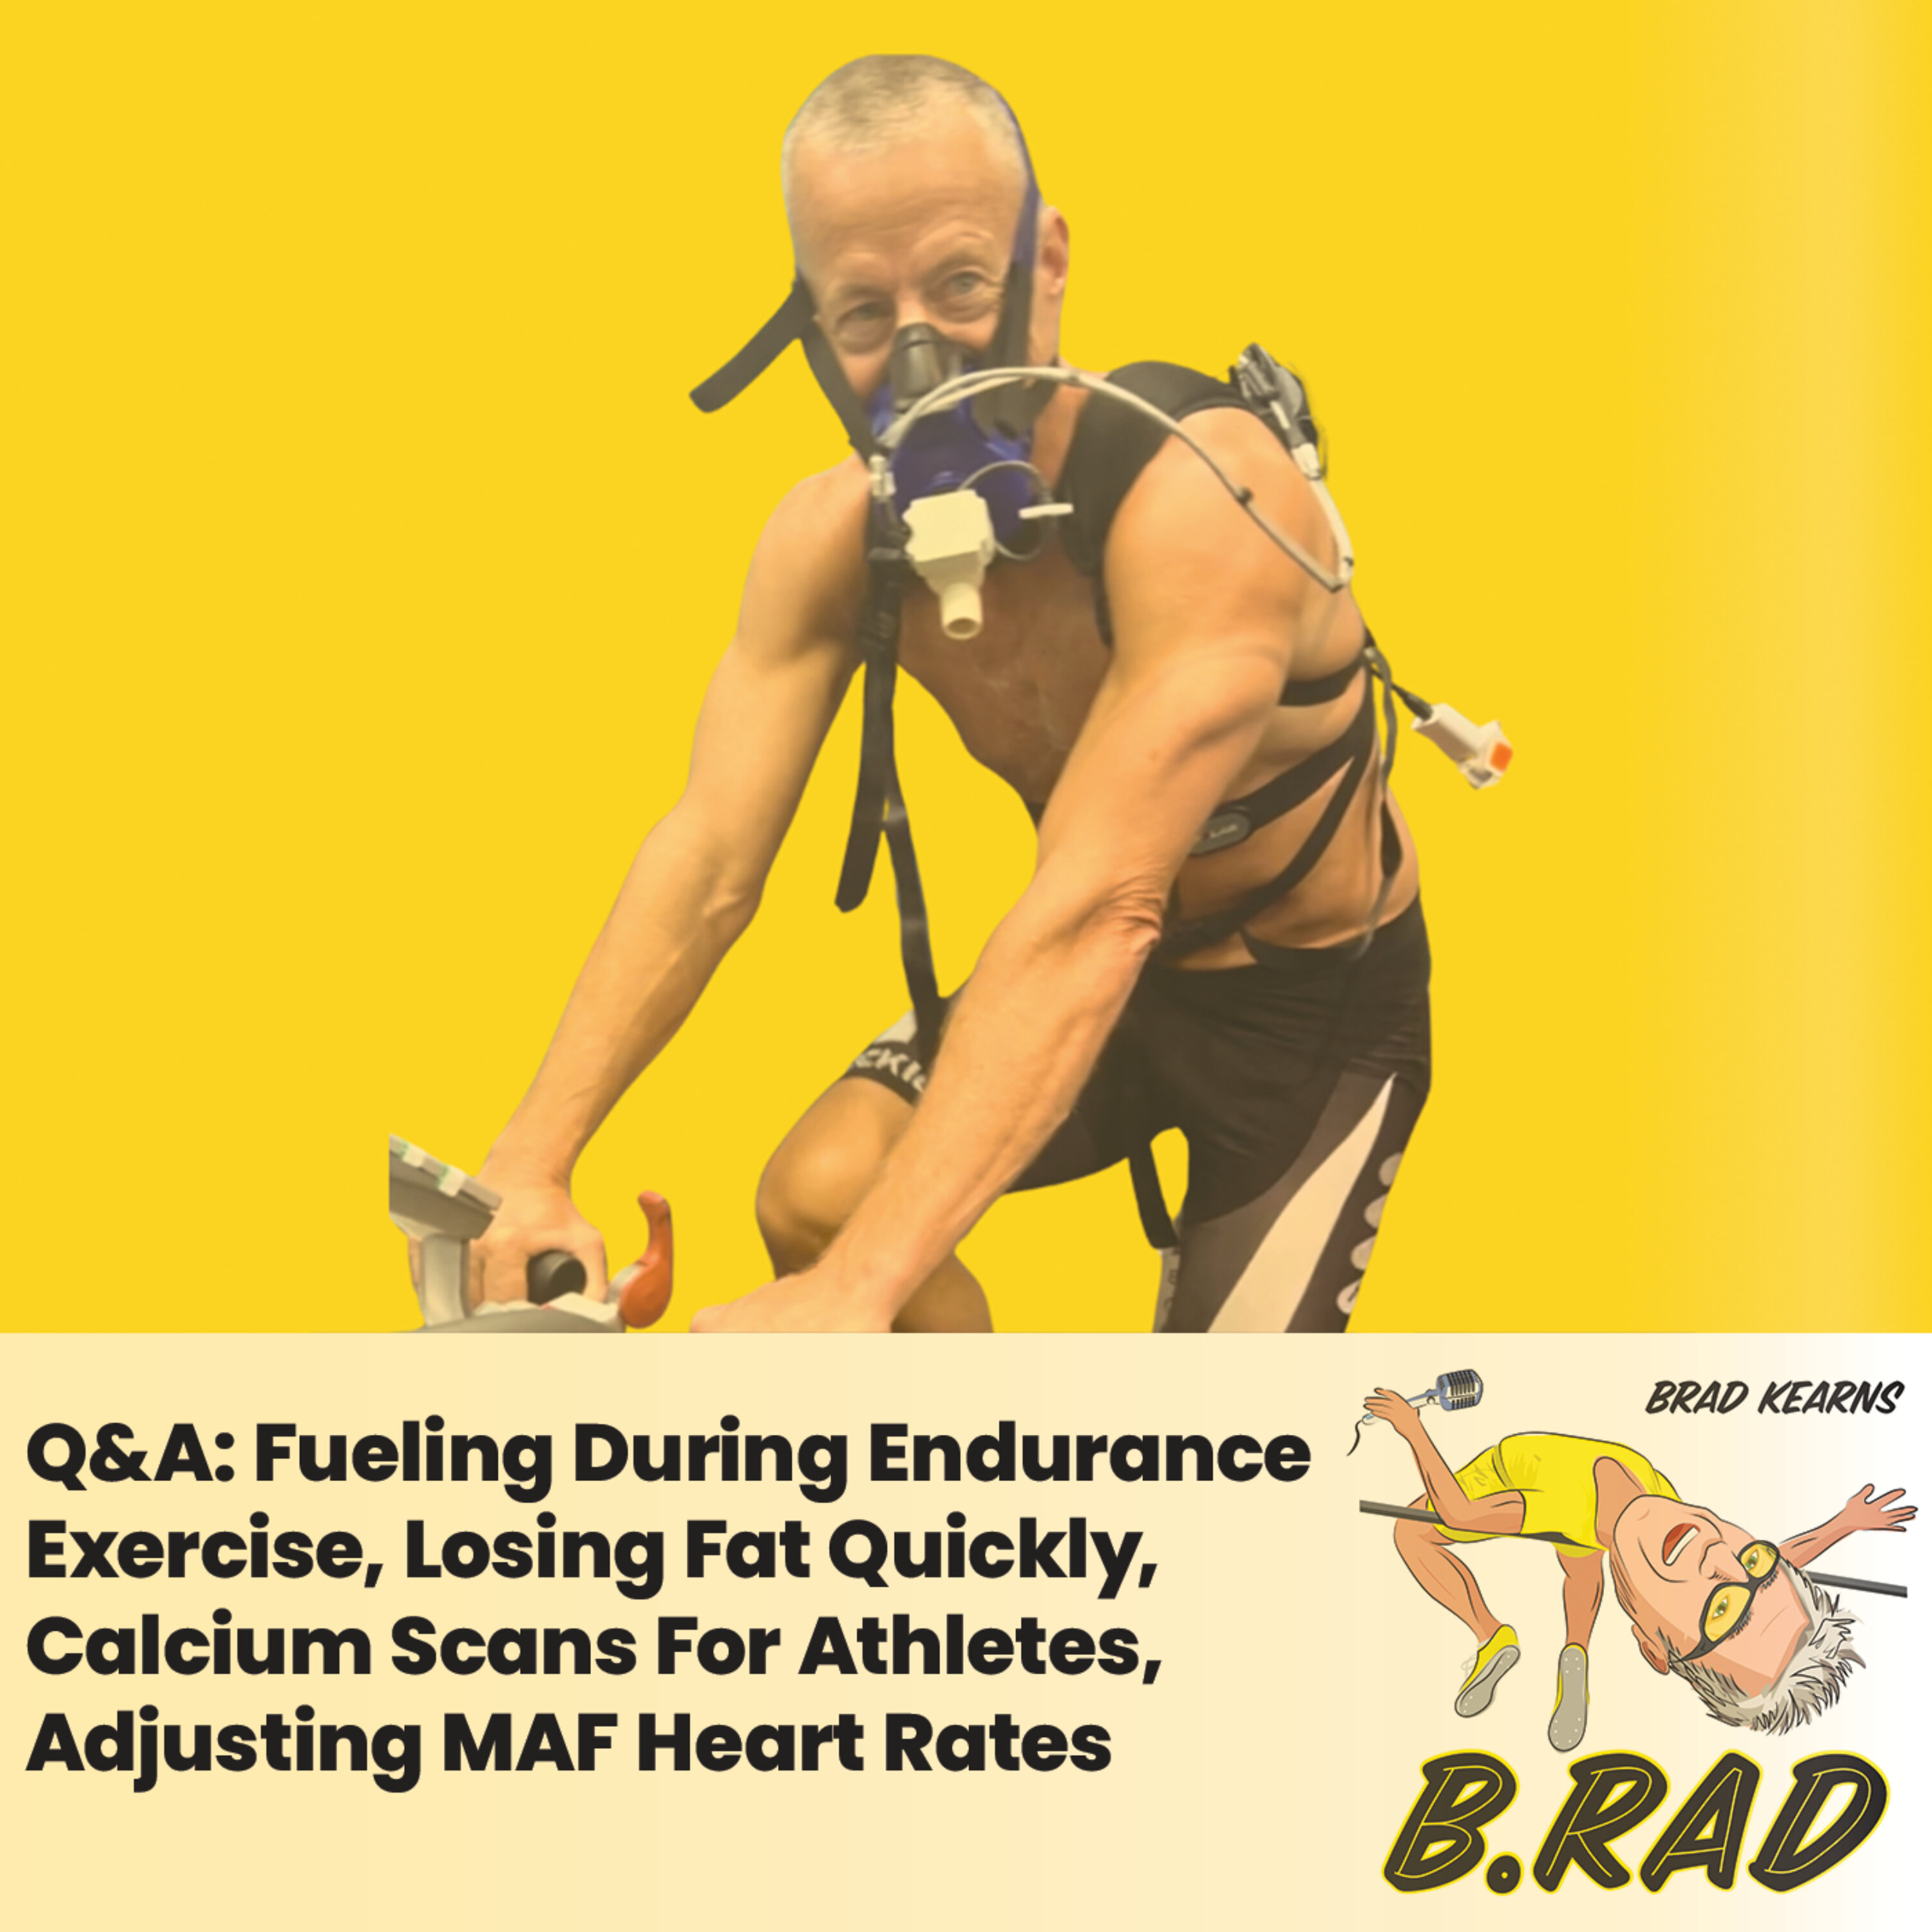 Q&A: Fueling During Endurance Exercise, Losing Fat Quickly, Calcium Scans For Athletes, Adjusting MAF Heart Rates